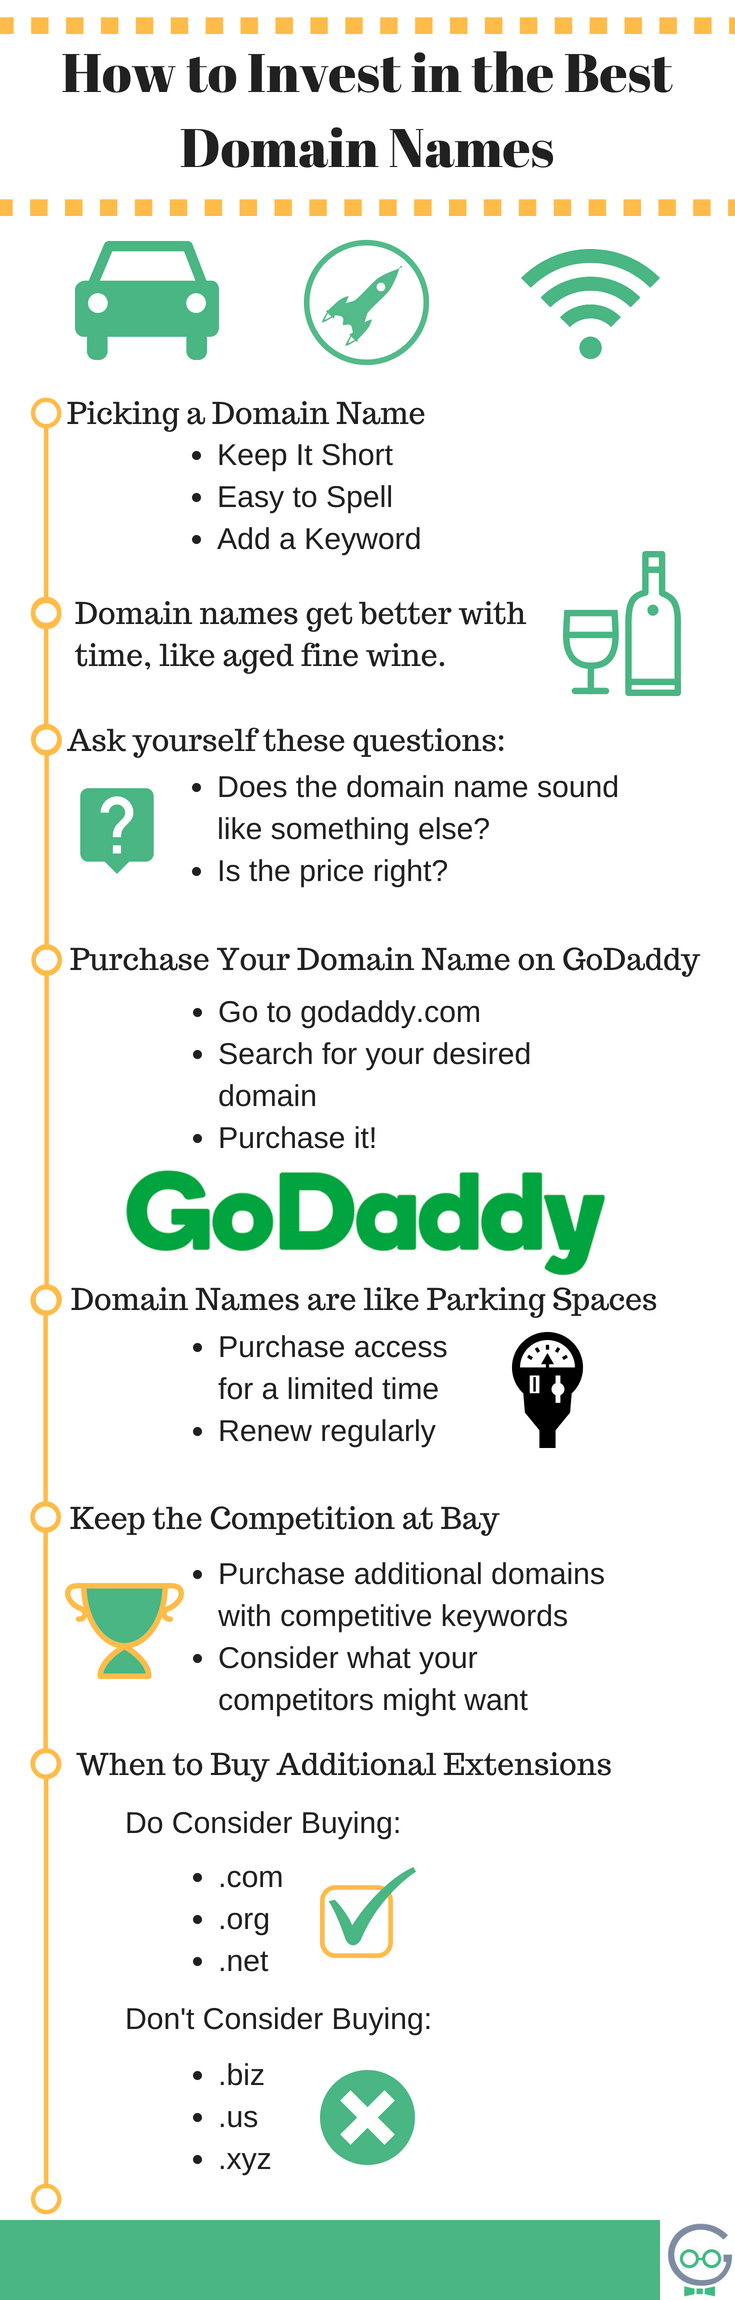 How to Invest in the Best Domain Names